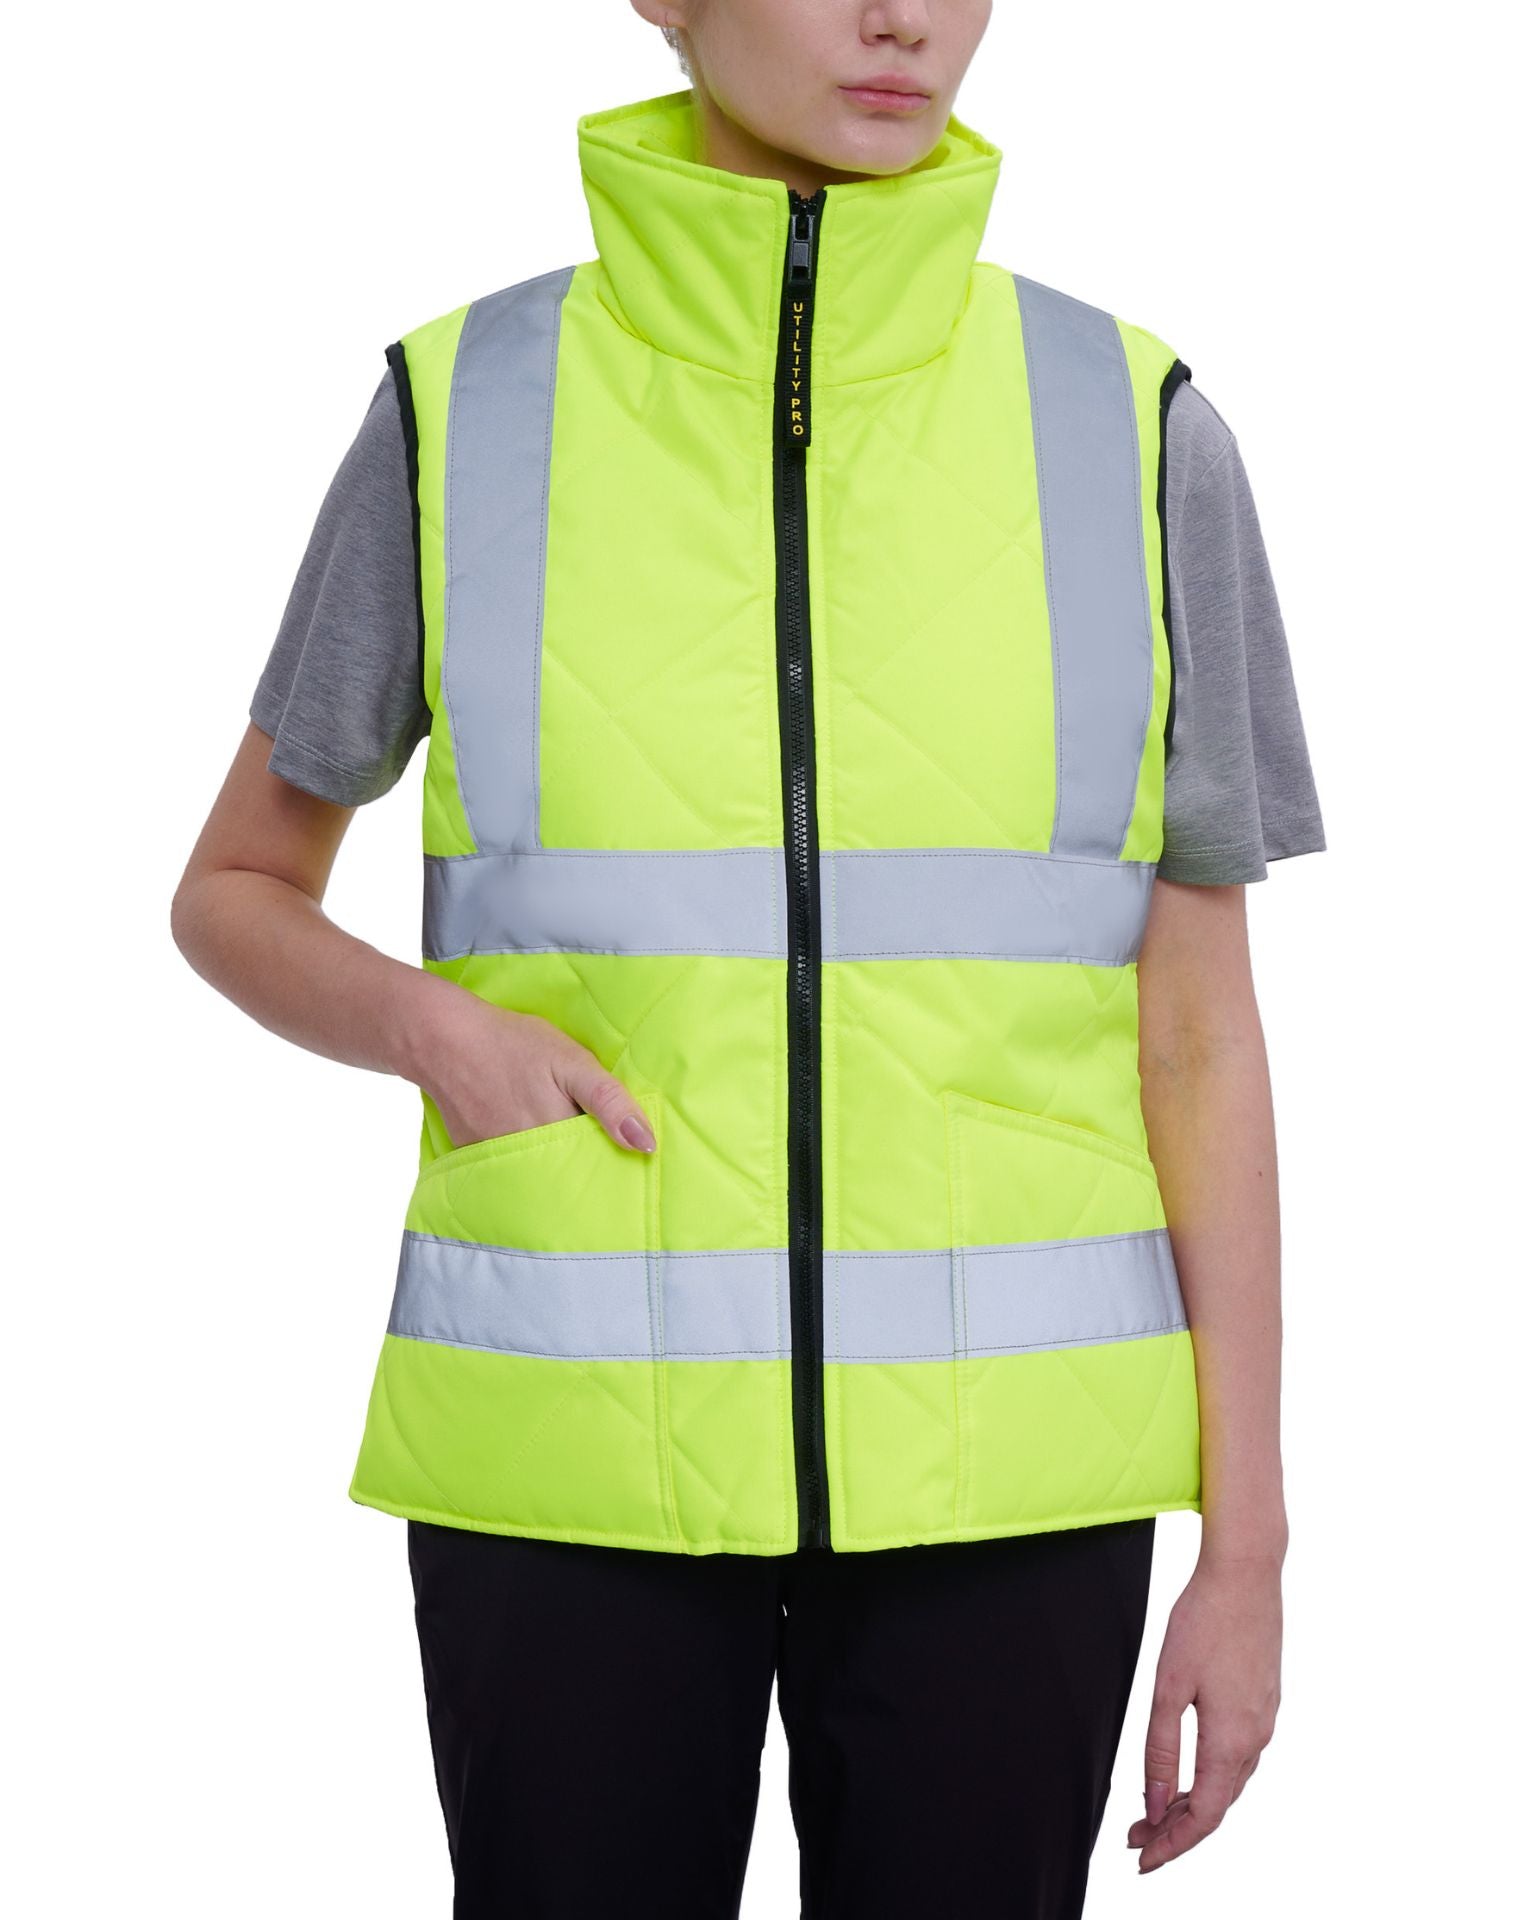 UHV995 HiVis Women's WarmUP Insulated Safety Vest - Utility Pro Wear